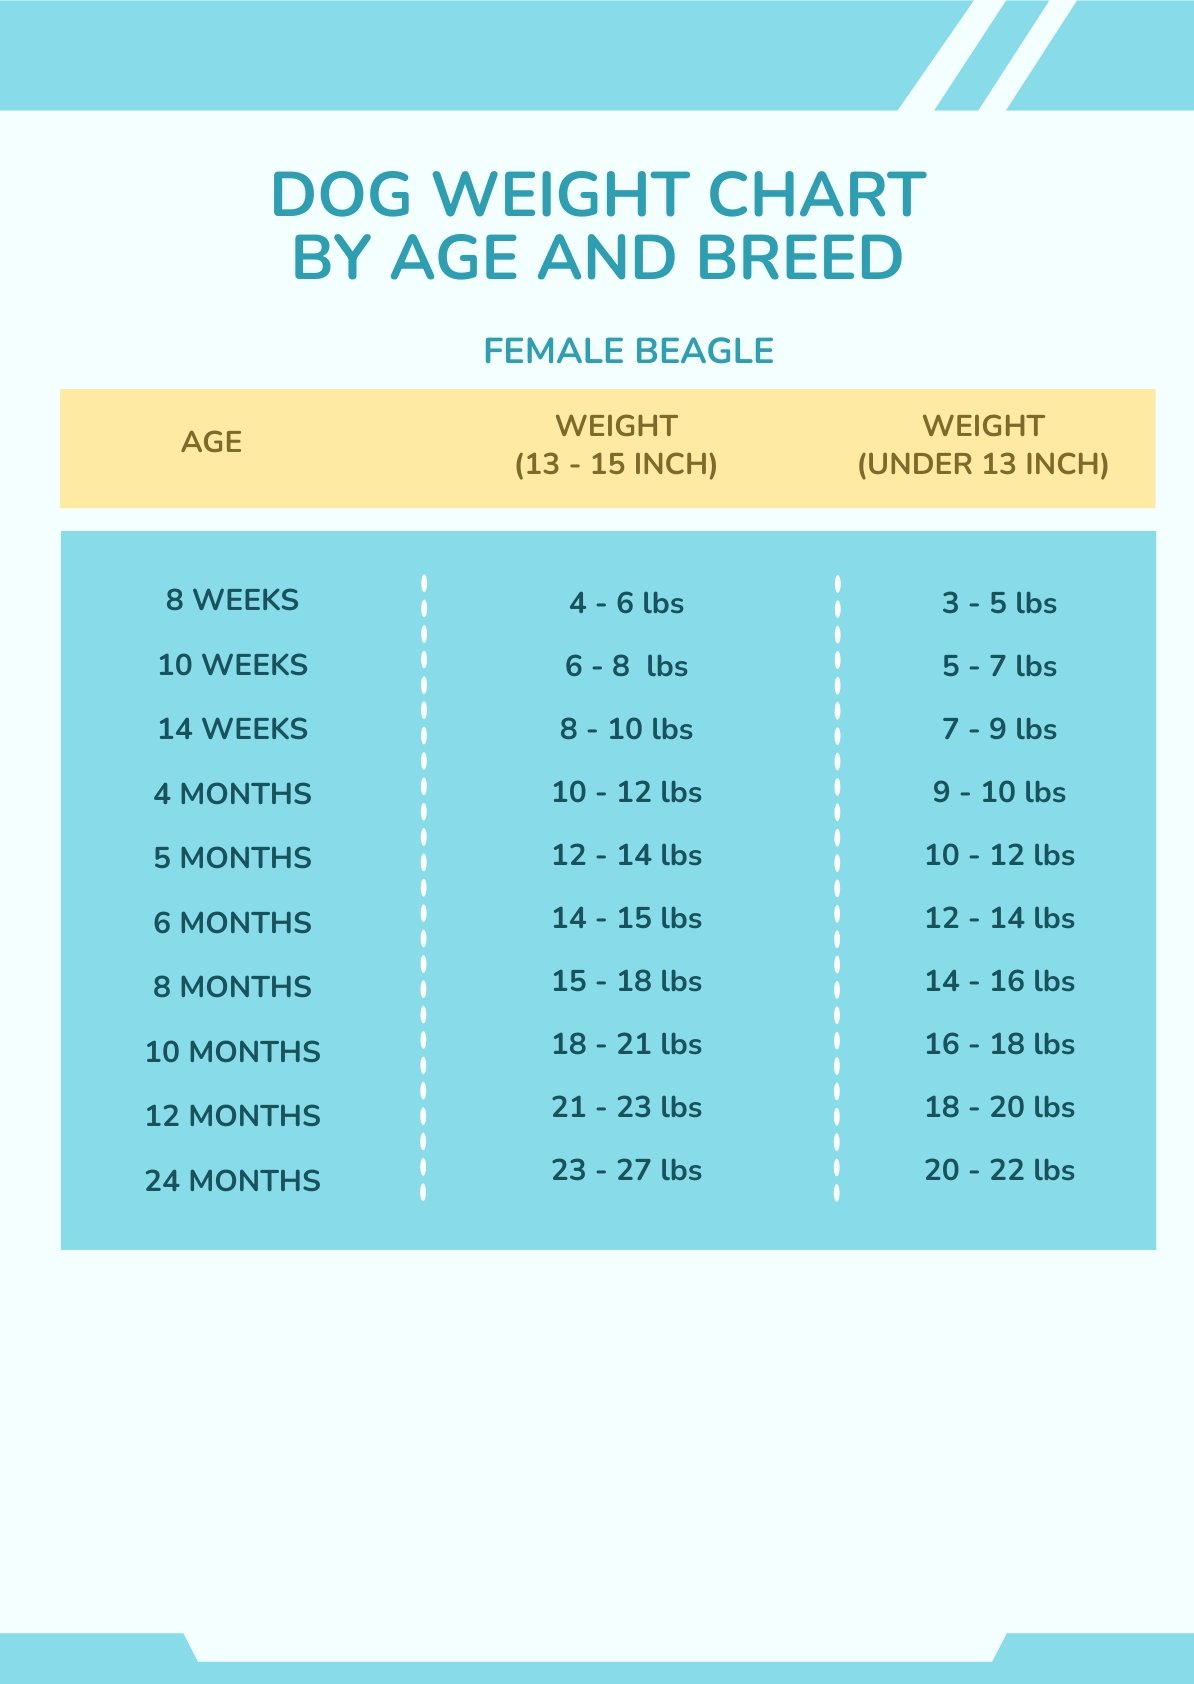 Dog Weight Chart By Age And Breed in PSD - Download | Template.net